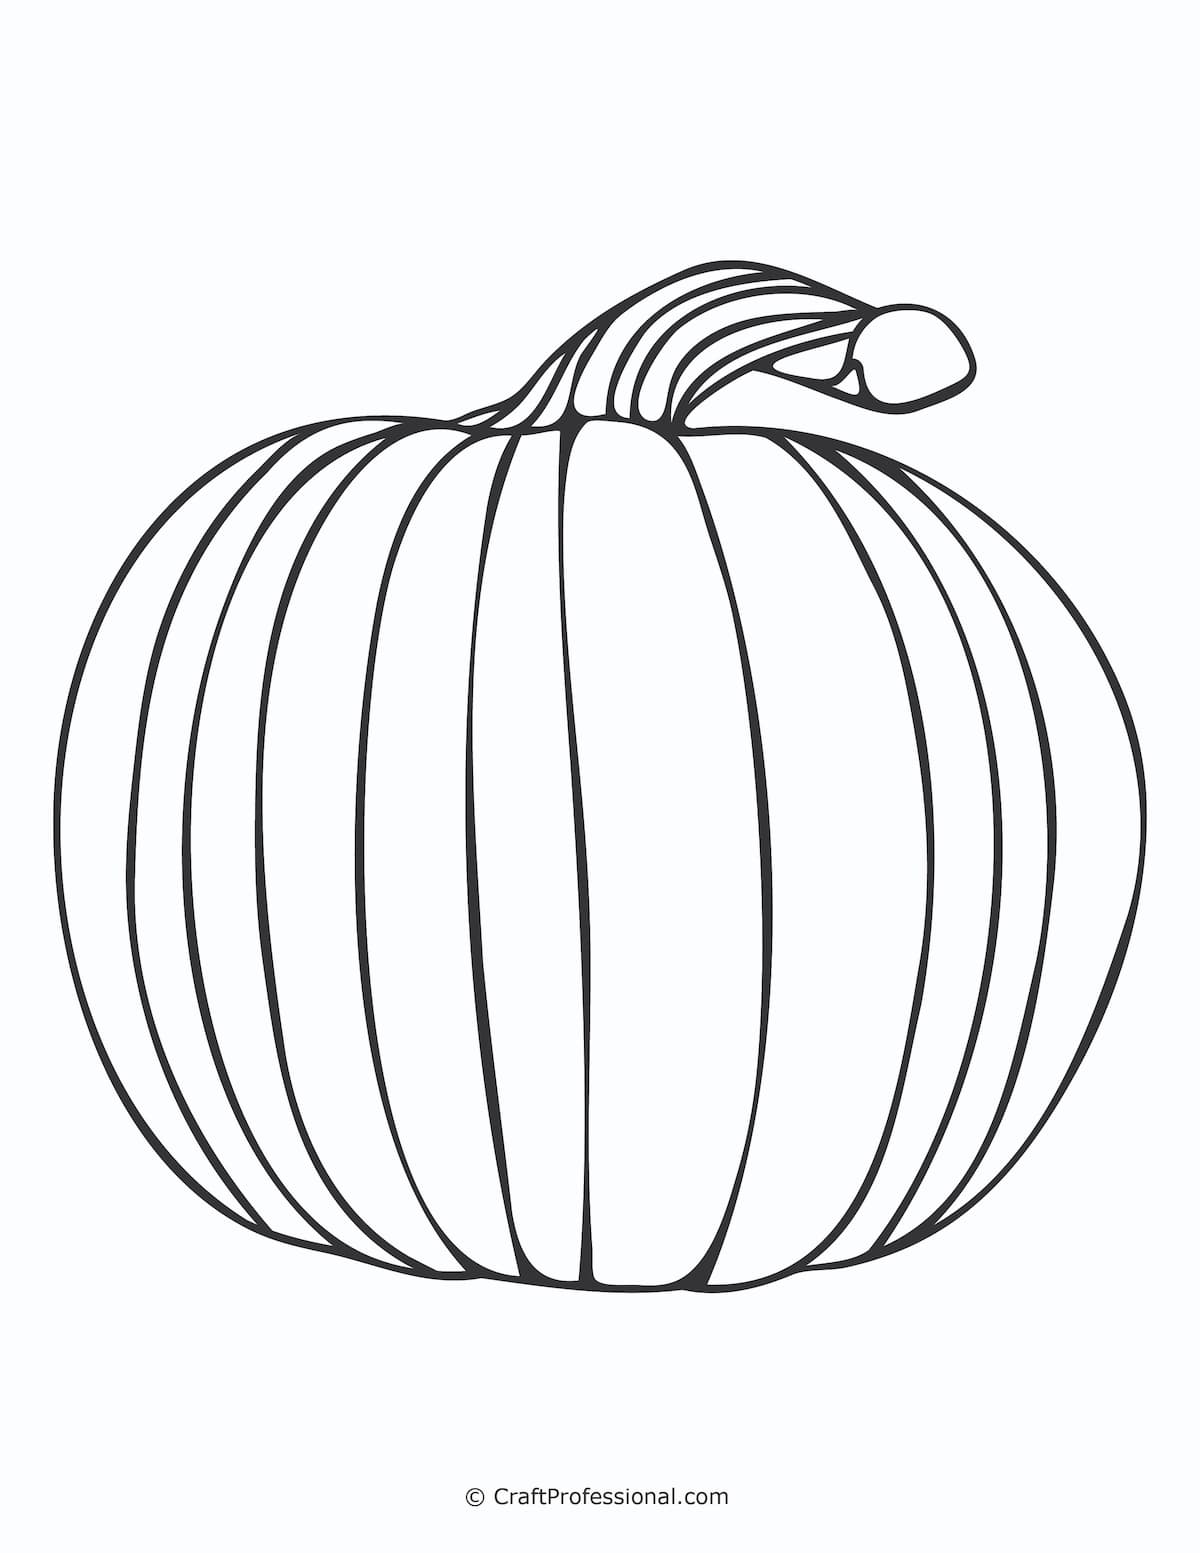 Pumpkin Coloring Pages For Adults Kids